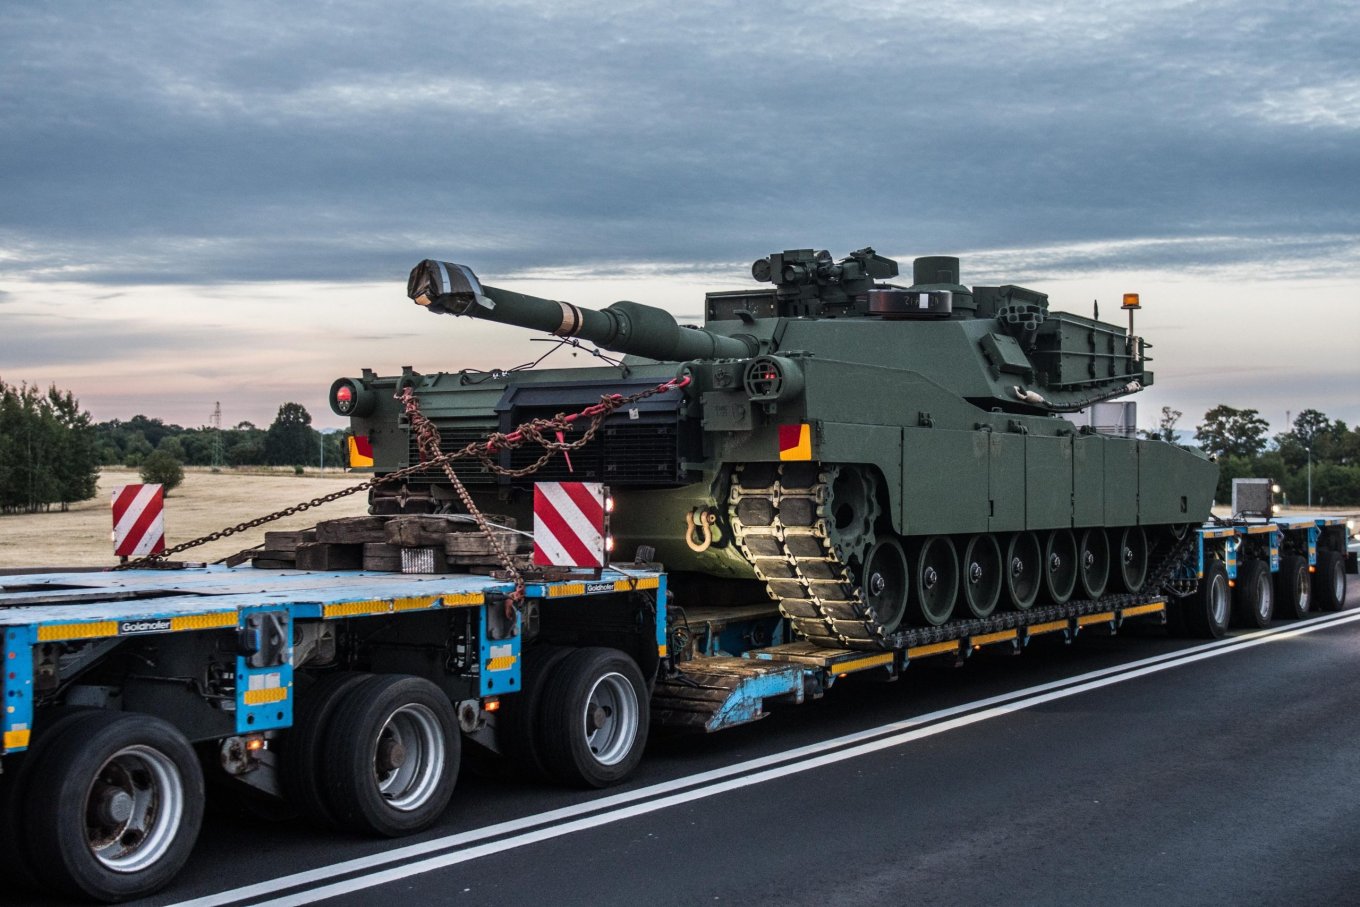 American Abrams tanks arrived in Poland for tank crews training, Ministry of National Defense of Poland, Defense Express